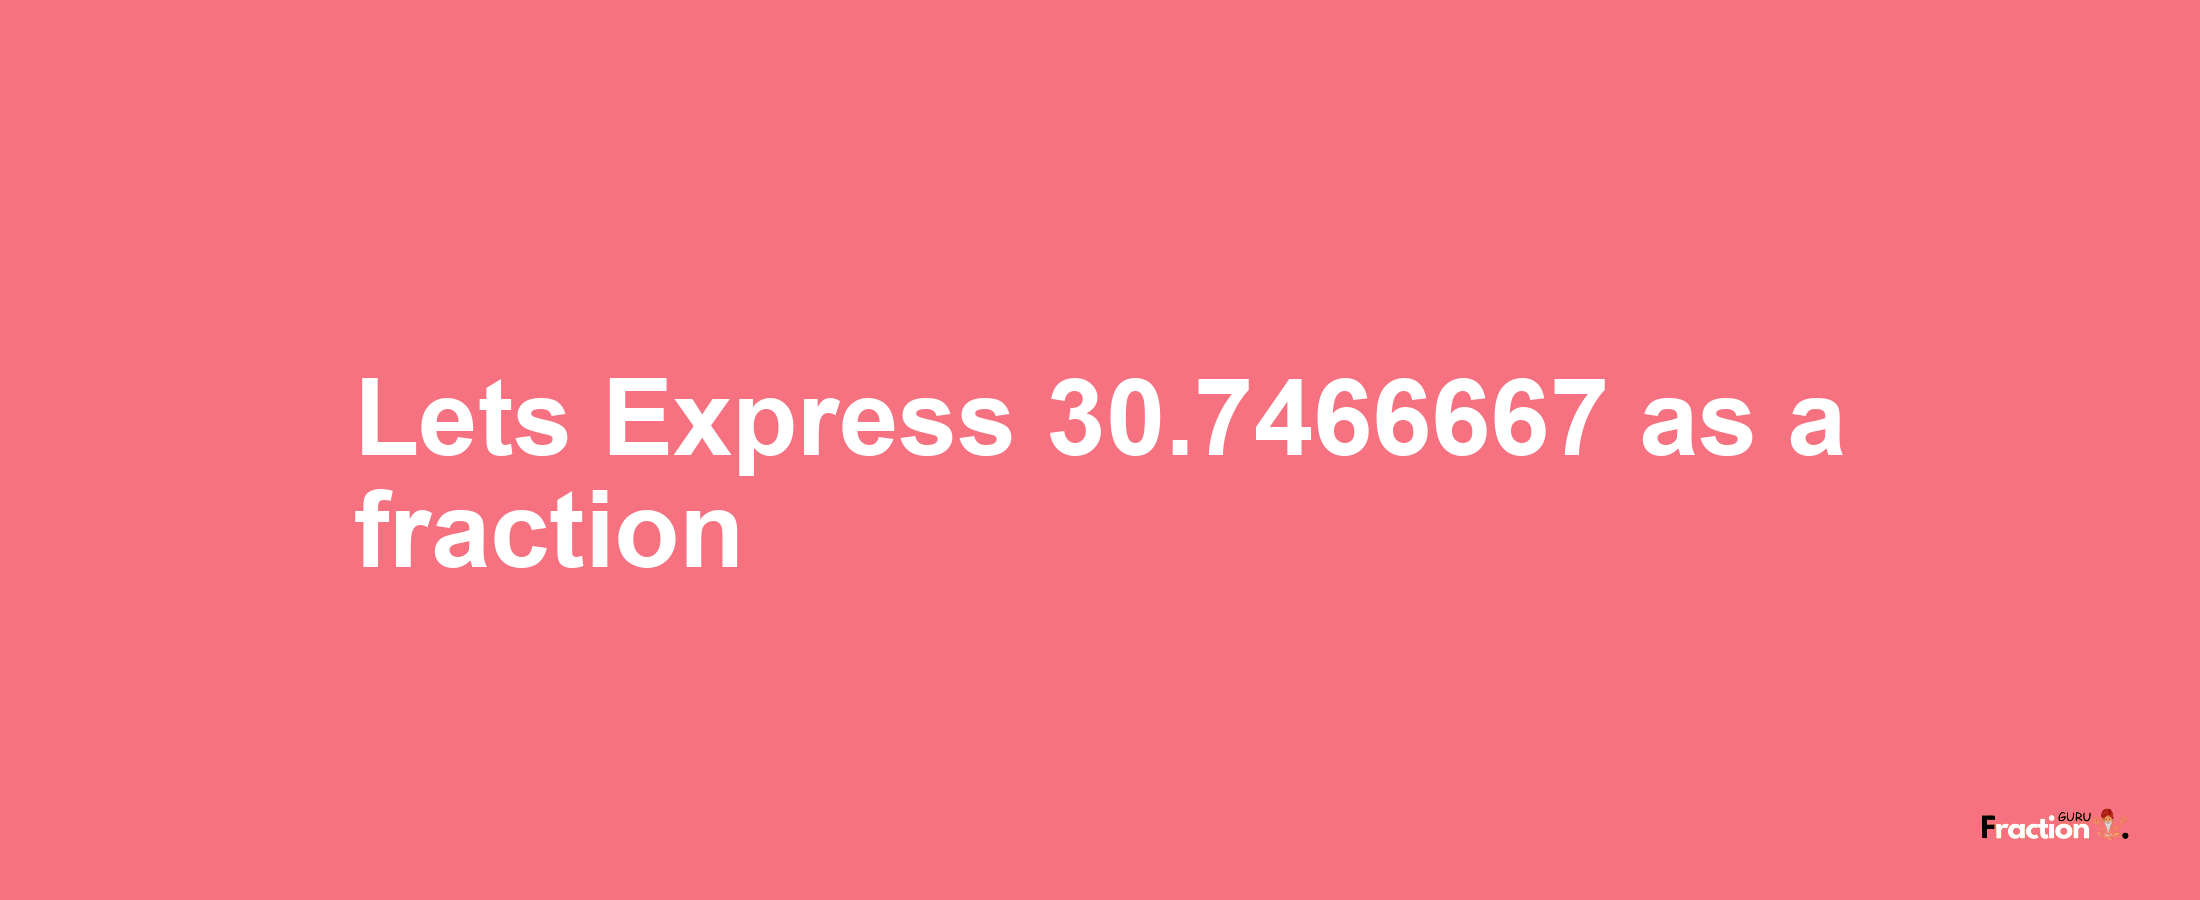 Lets Express 30.7466667 as afraction